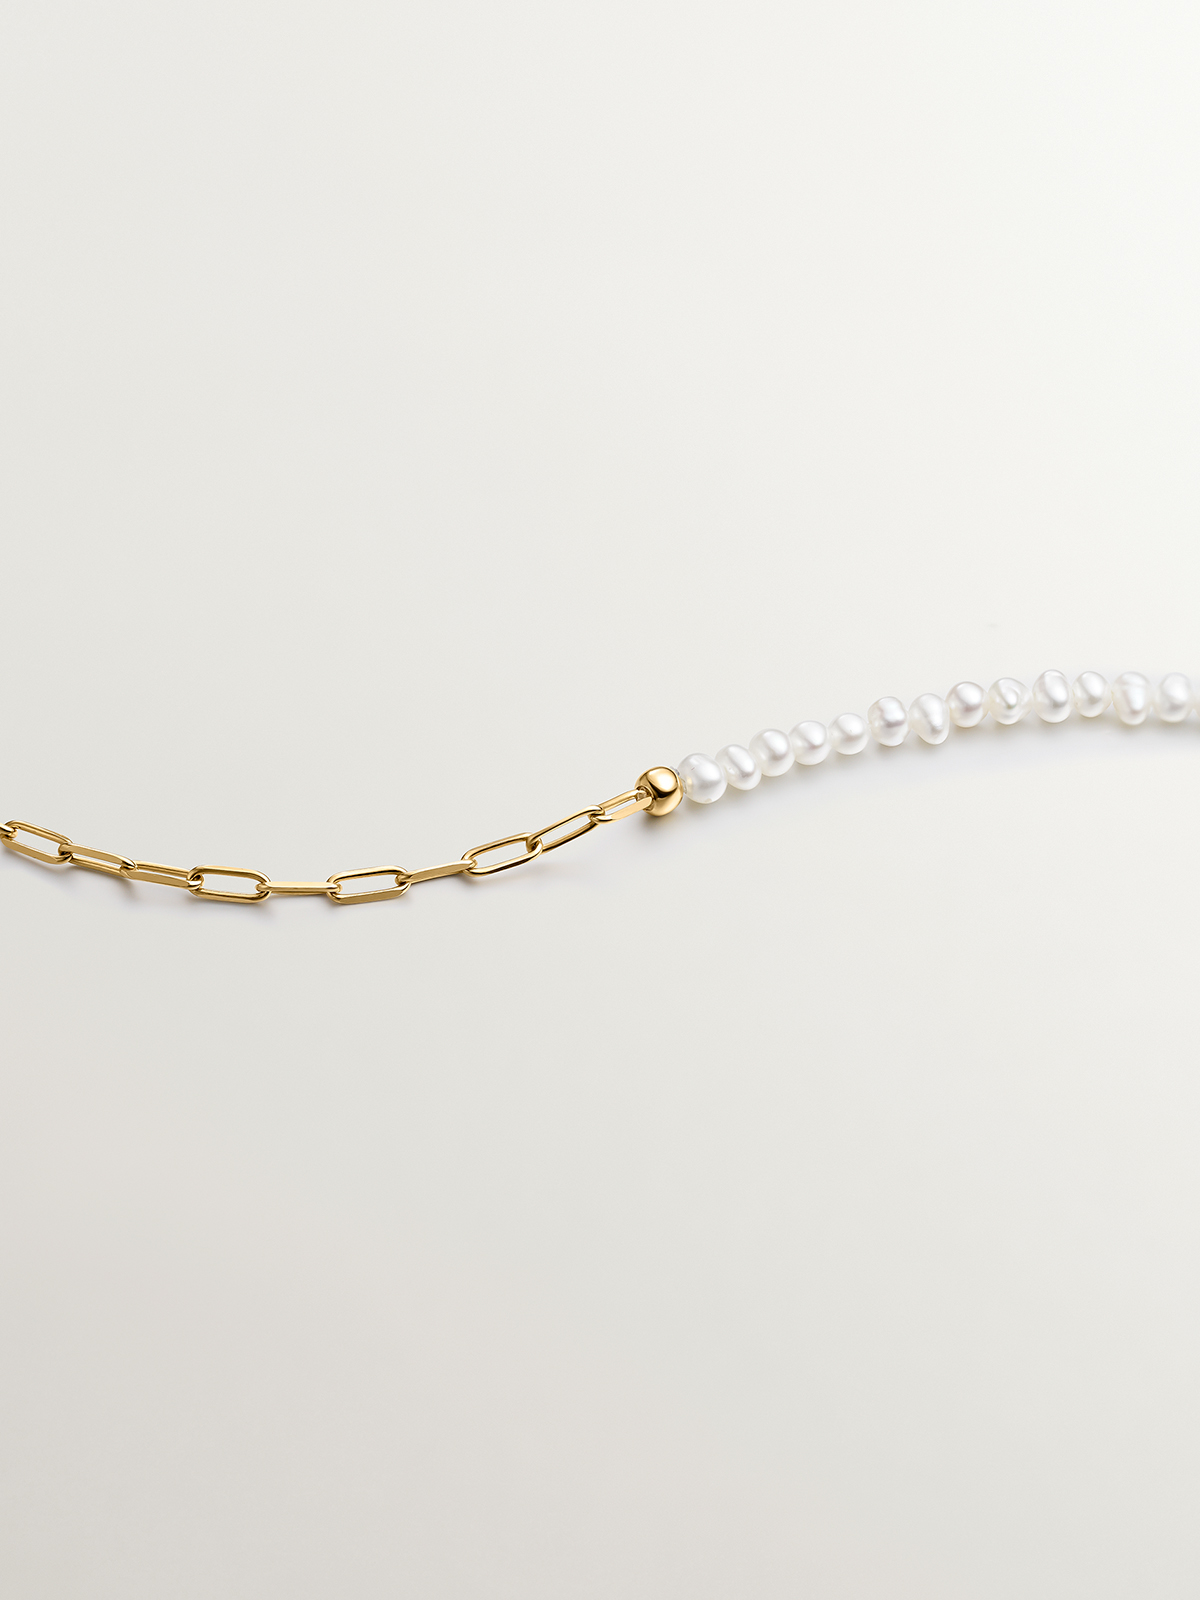 925 silver link necklace in 18k yellow gold with pearls